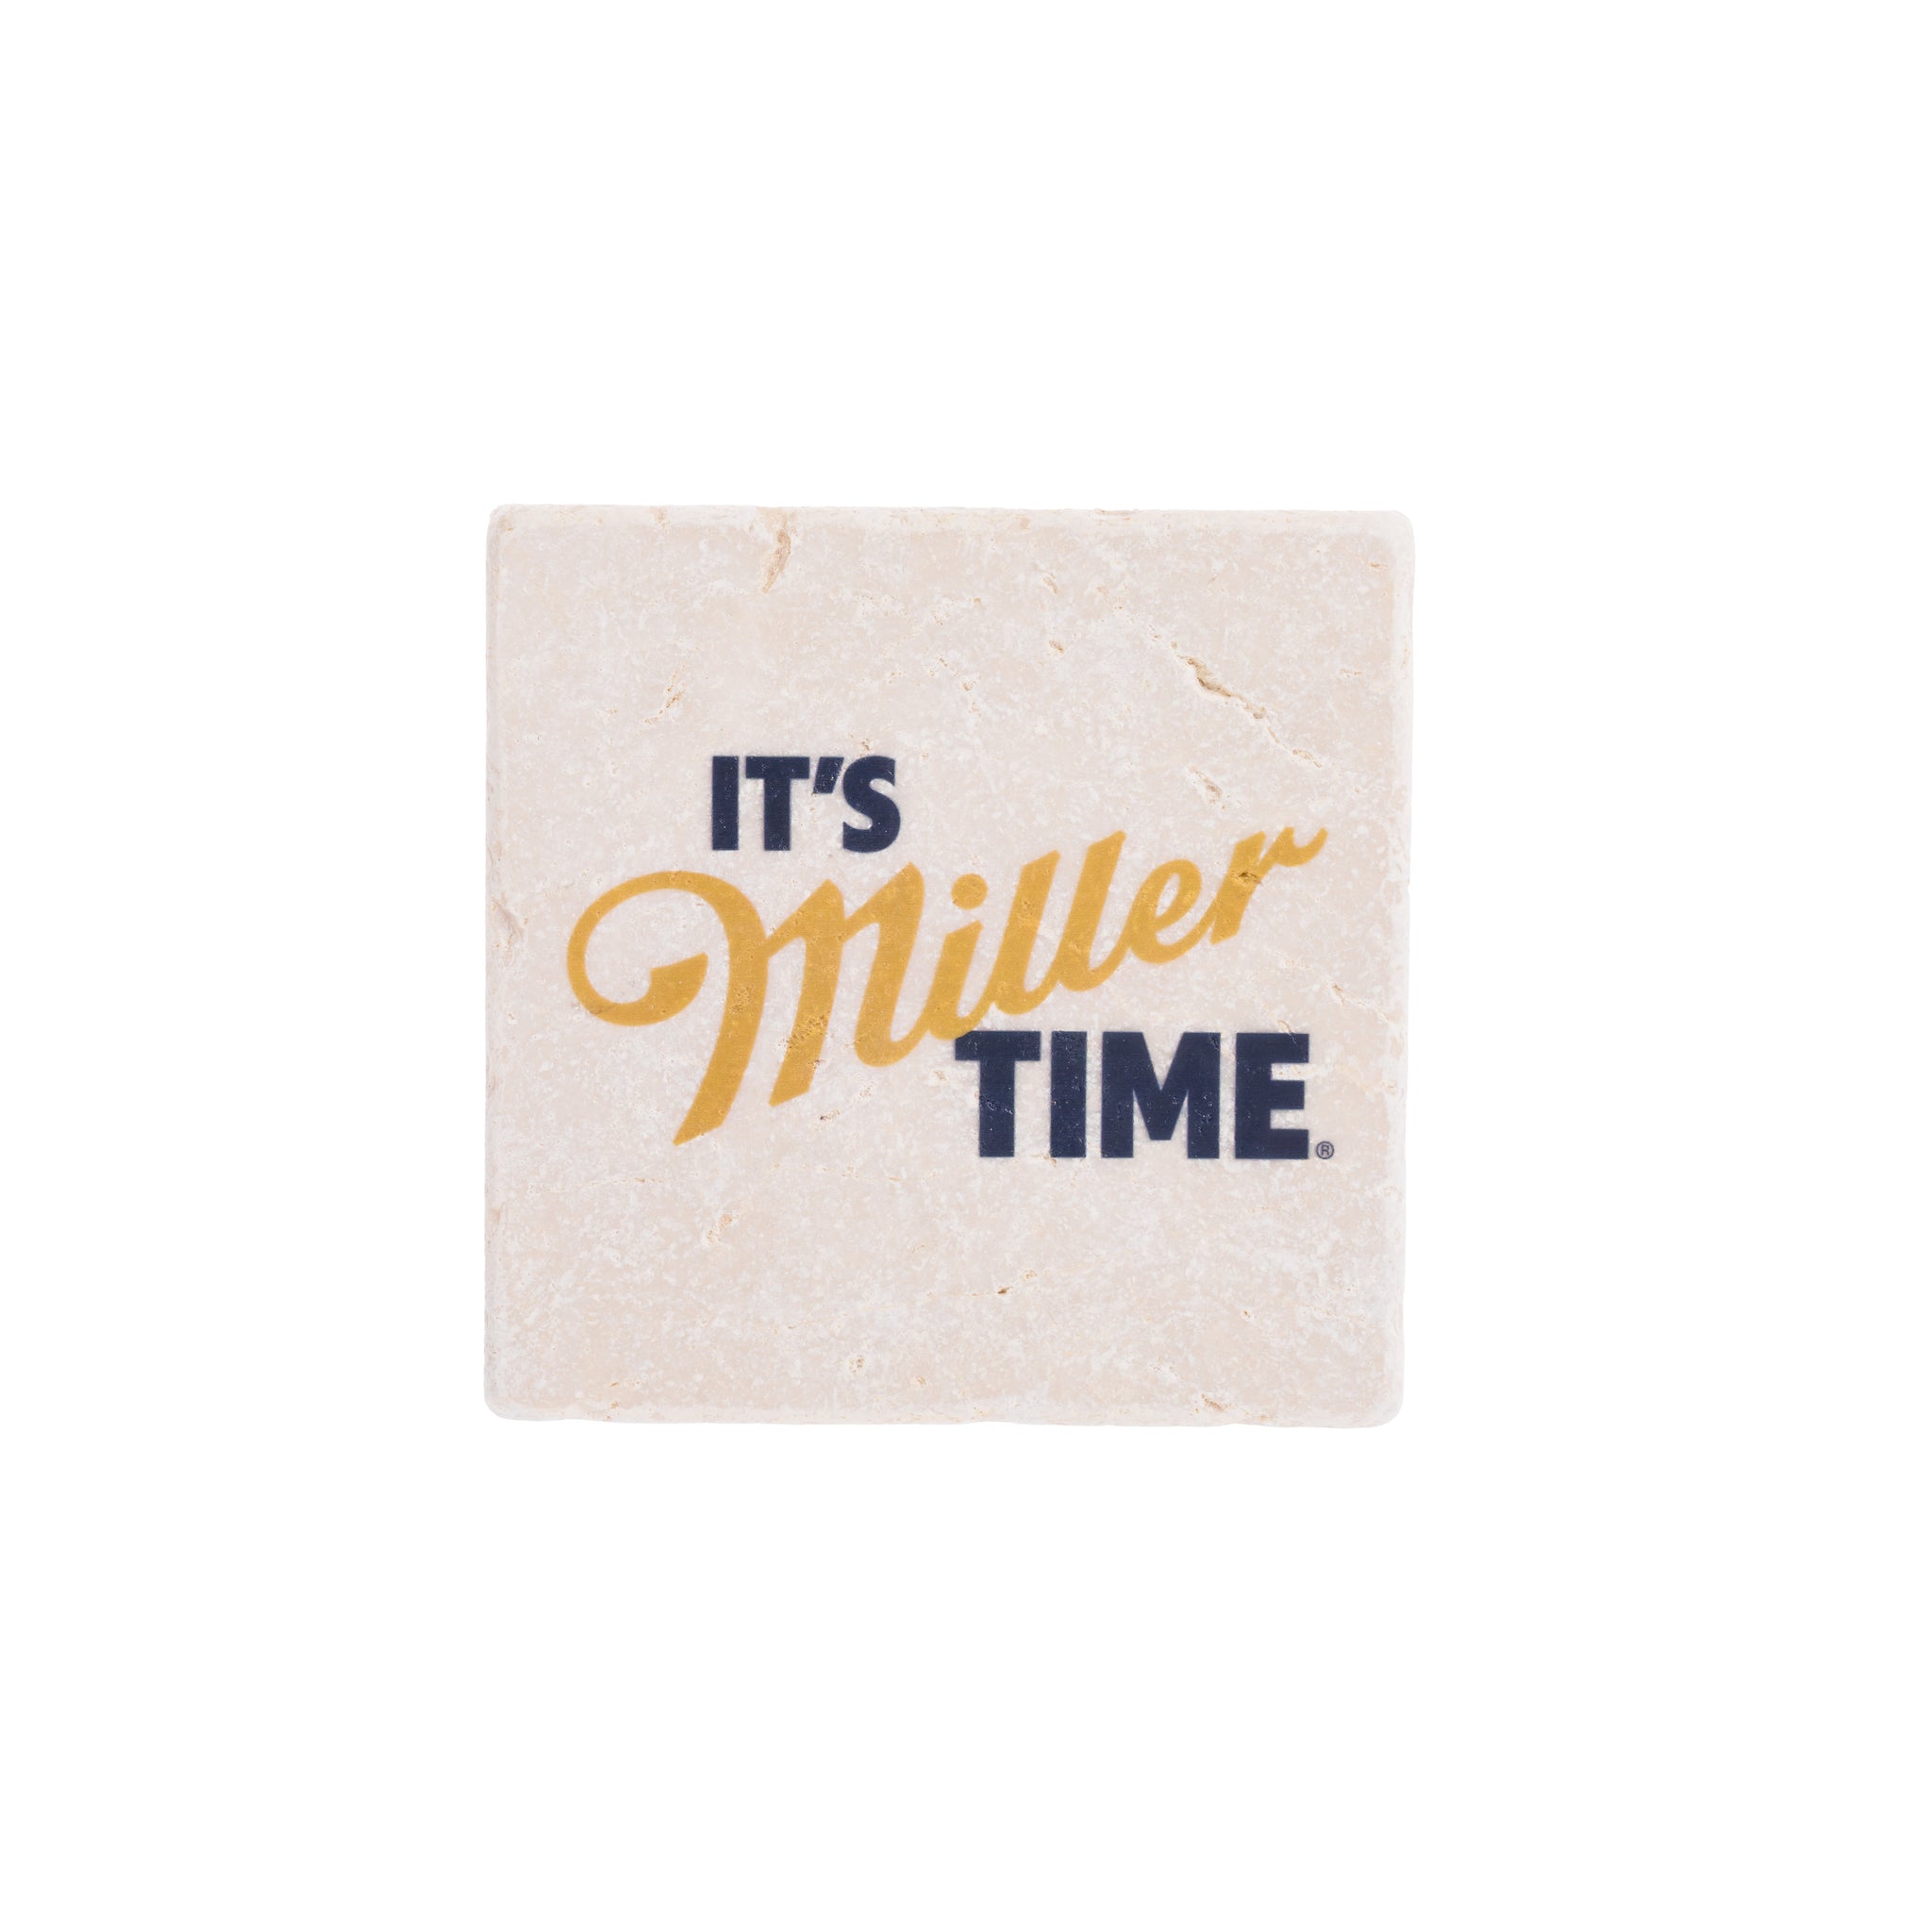 IT'S MILLER TIME MARBLE COASTER